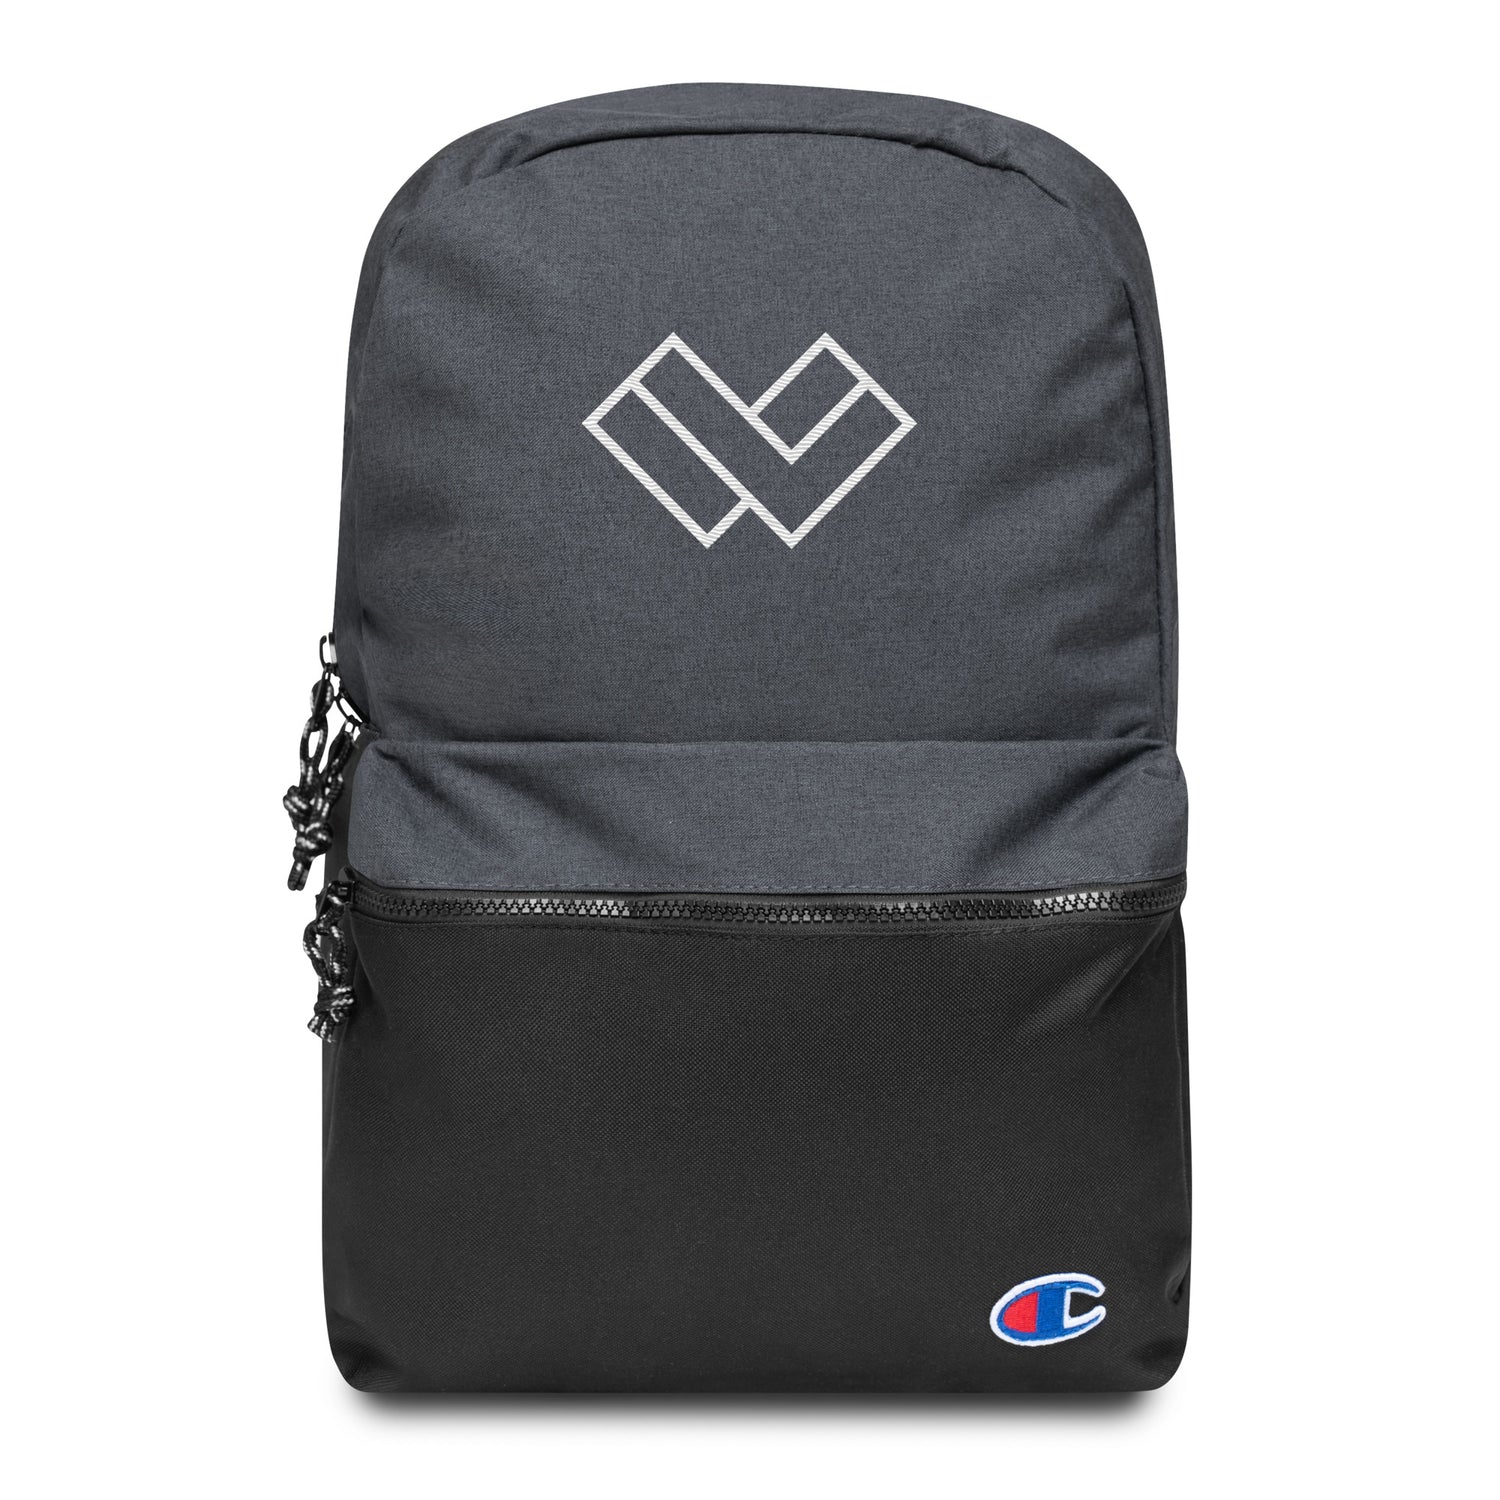 Lax World x Champion’s Dark-themed Cradle Lacrosse Bag for Women - Front 